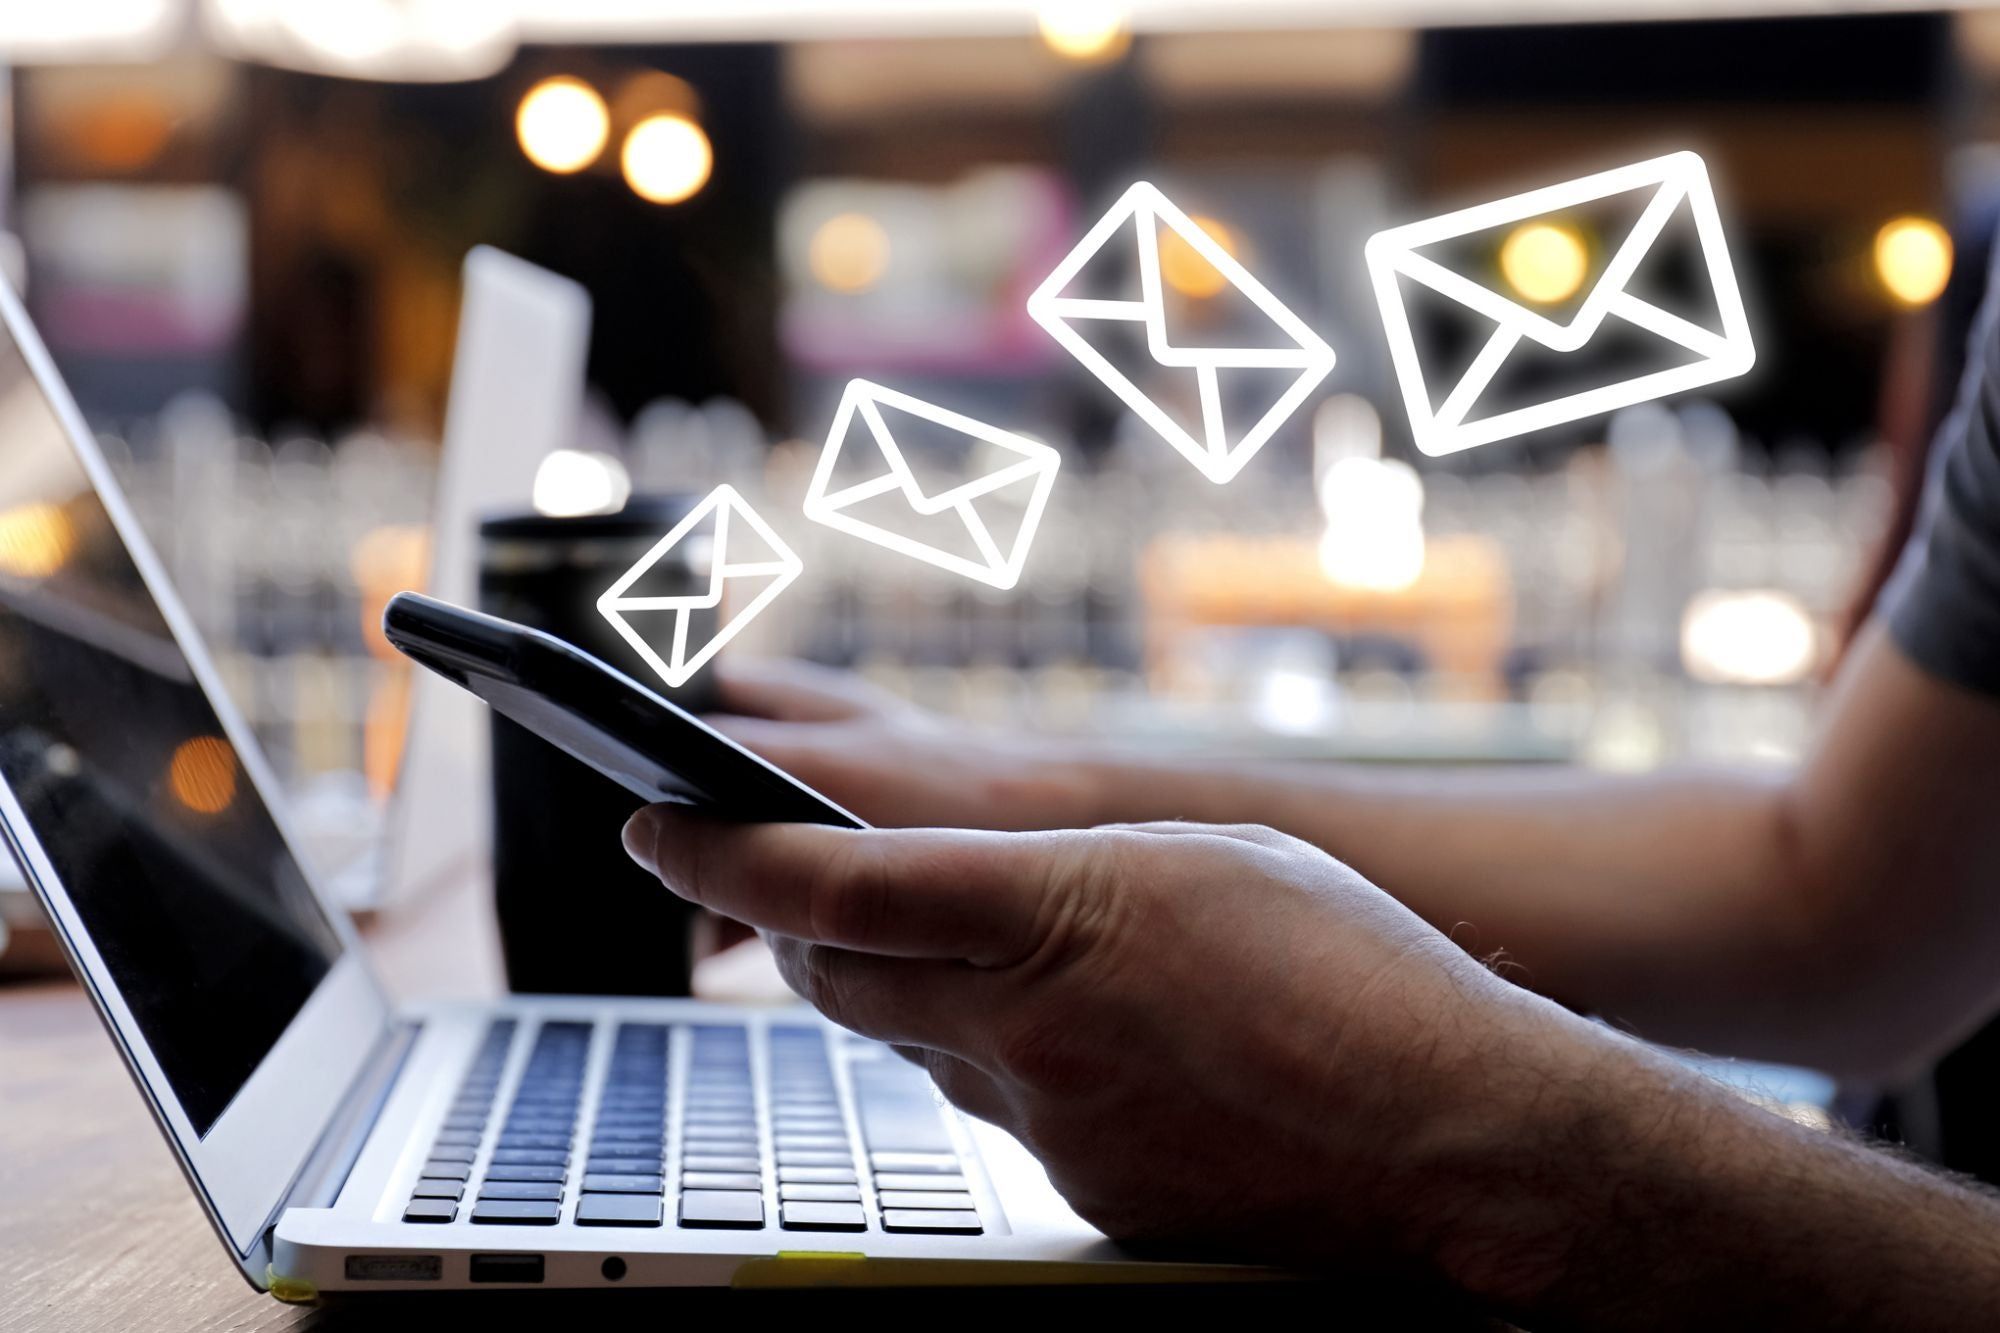 Ways to use email marketing to increase conversions